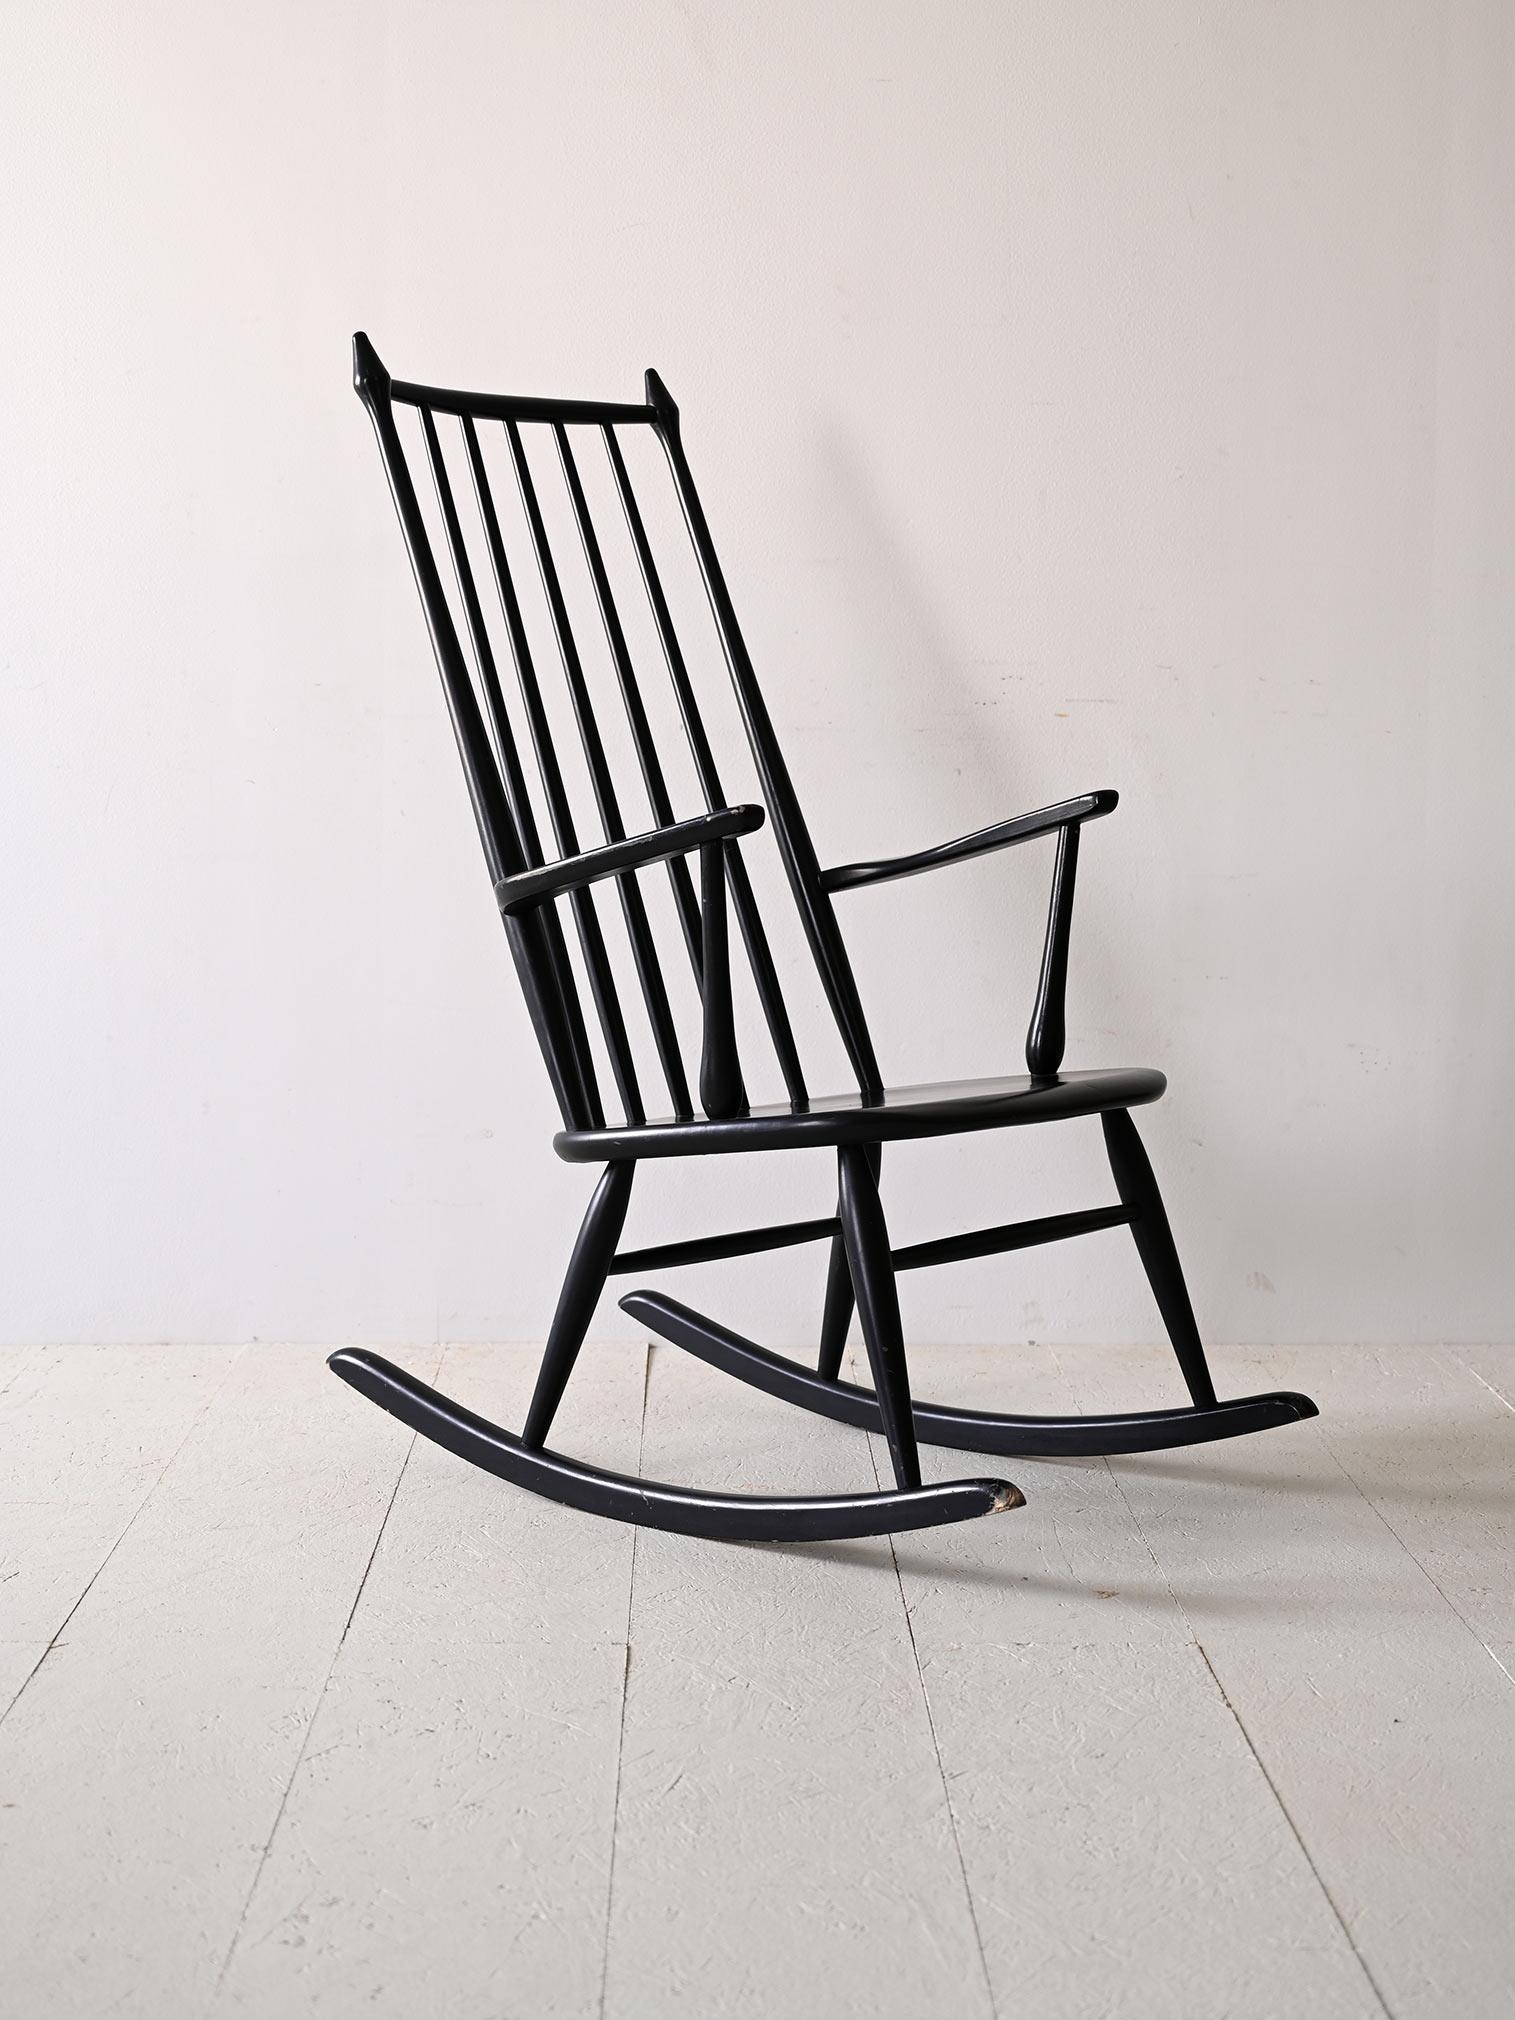 Vintage Scandinavian rocking chair.

Original rocking chair from the 1960s, completely made of wood and painted a black color, represents Nordic elegance with a modern twist. Elegant rounded armrests add comfort and a touch of sophistication, while